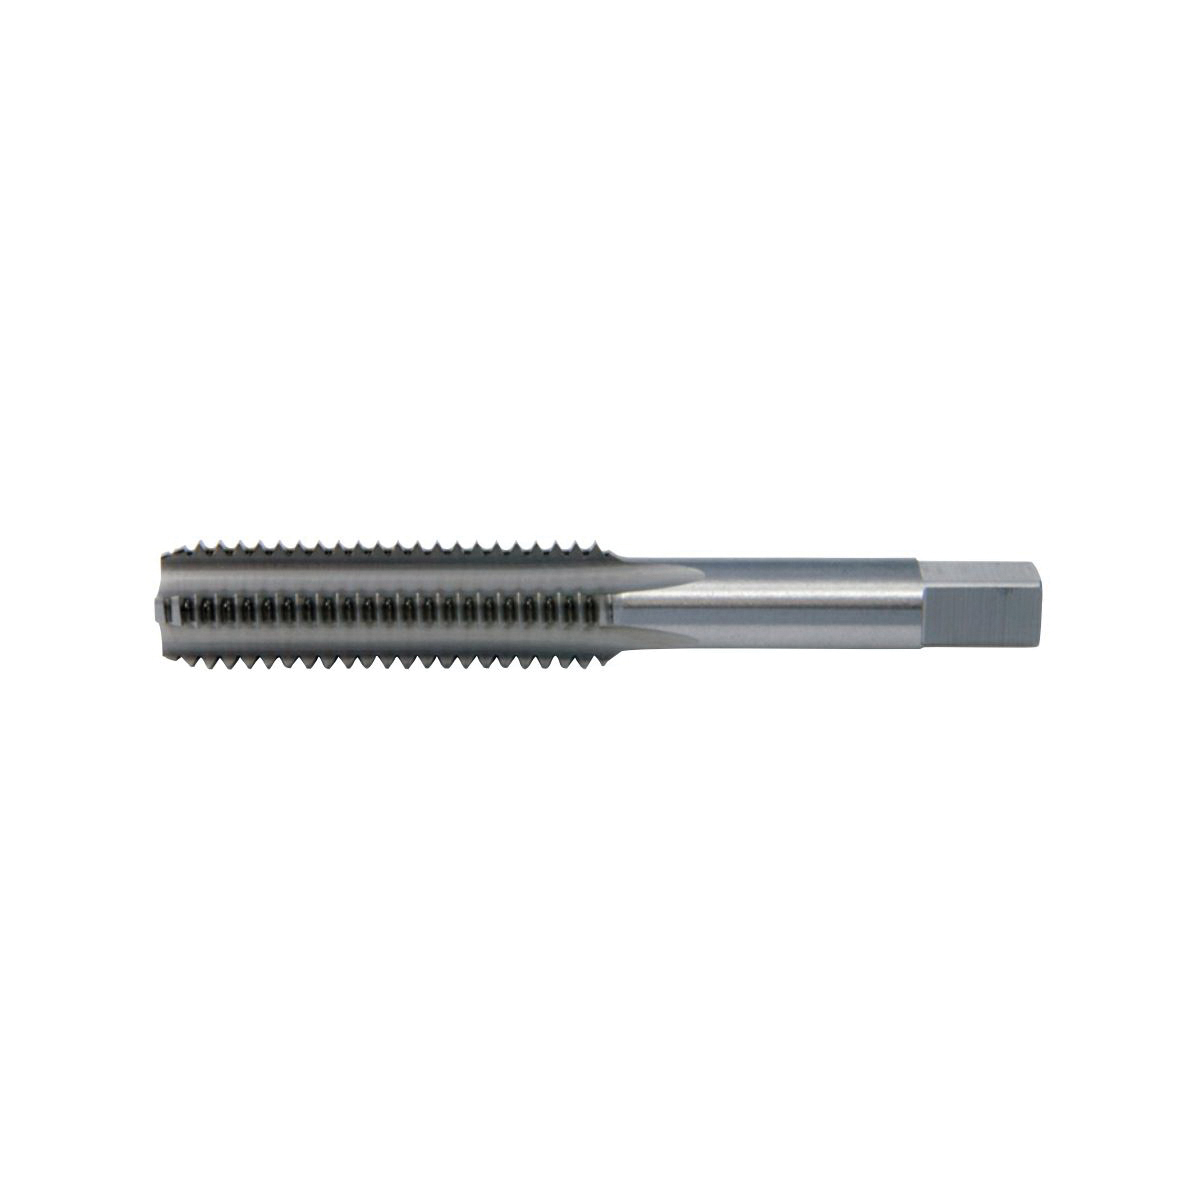 Cle-Line® C62059 0403 General Purpose Standard Straight Flute Hand Tap, Right Hand Cutting, 7/16-20 Thread, H3 Thread Limit, Bottoming Chamfer, 2 Flutes, Bright, HSS